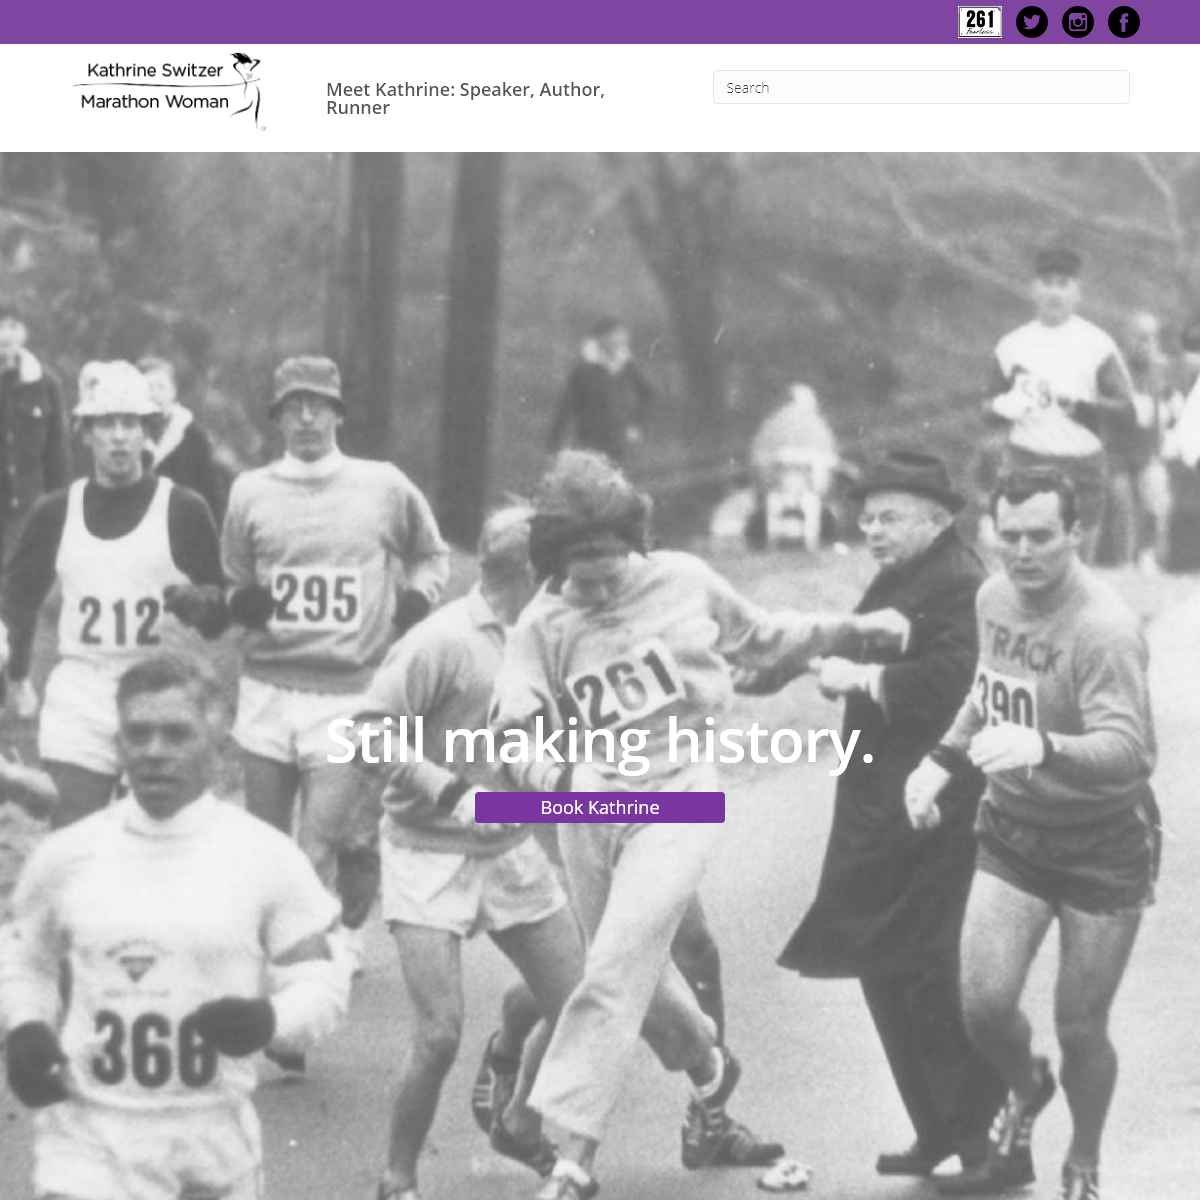 A complete backup of kathrineswitzer.com